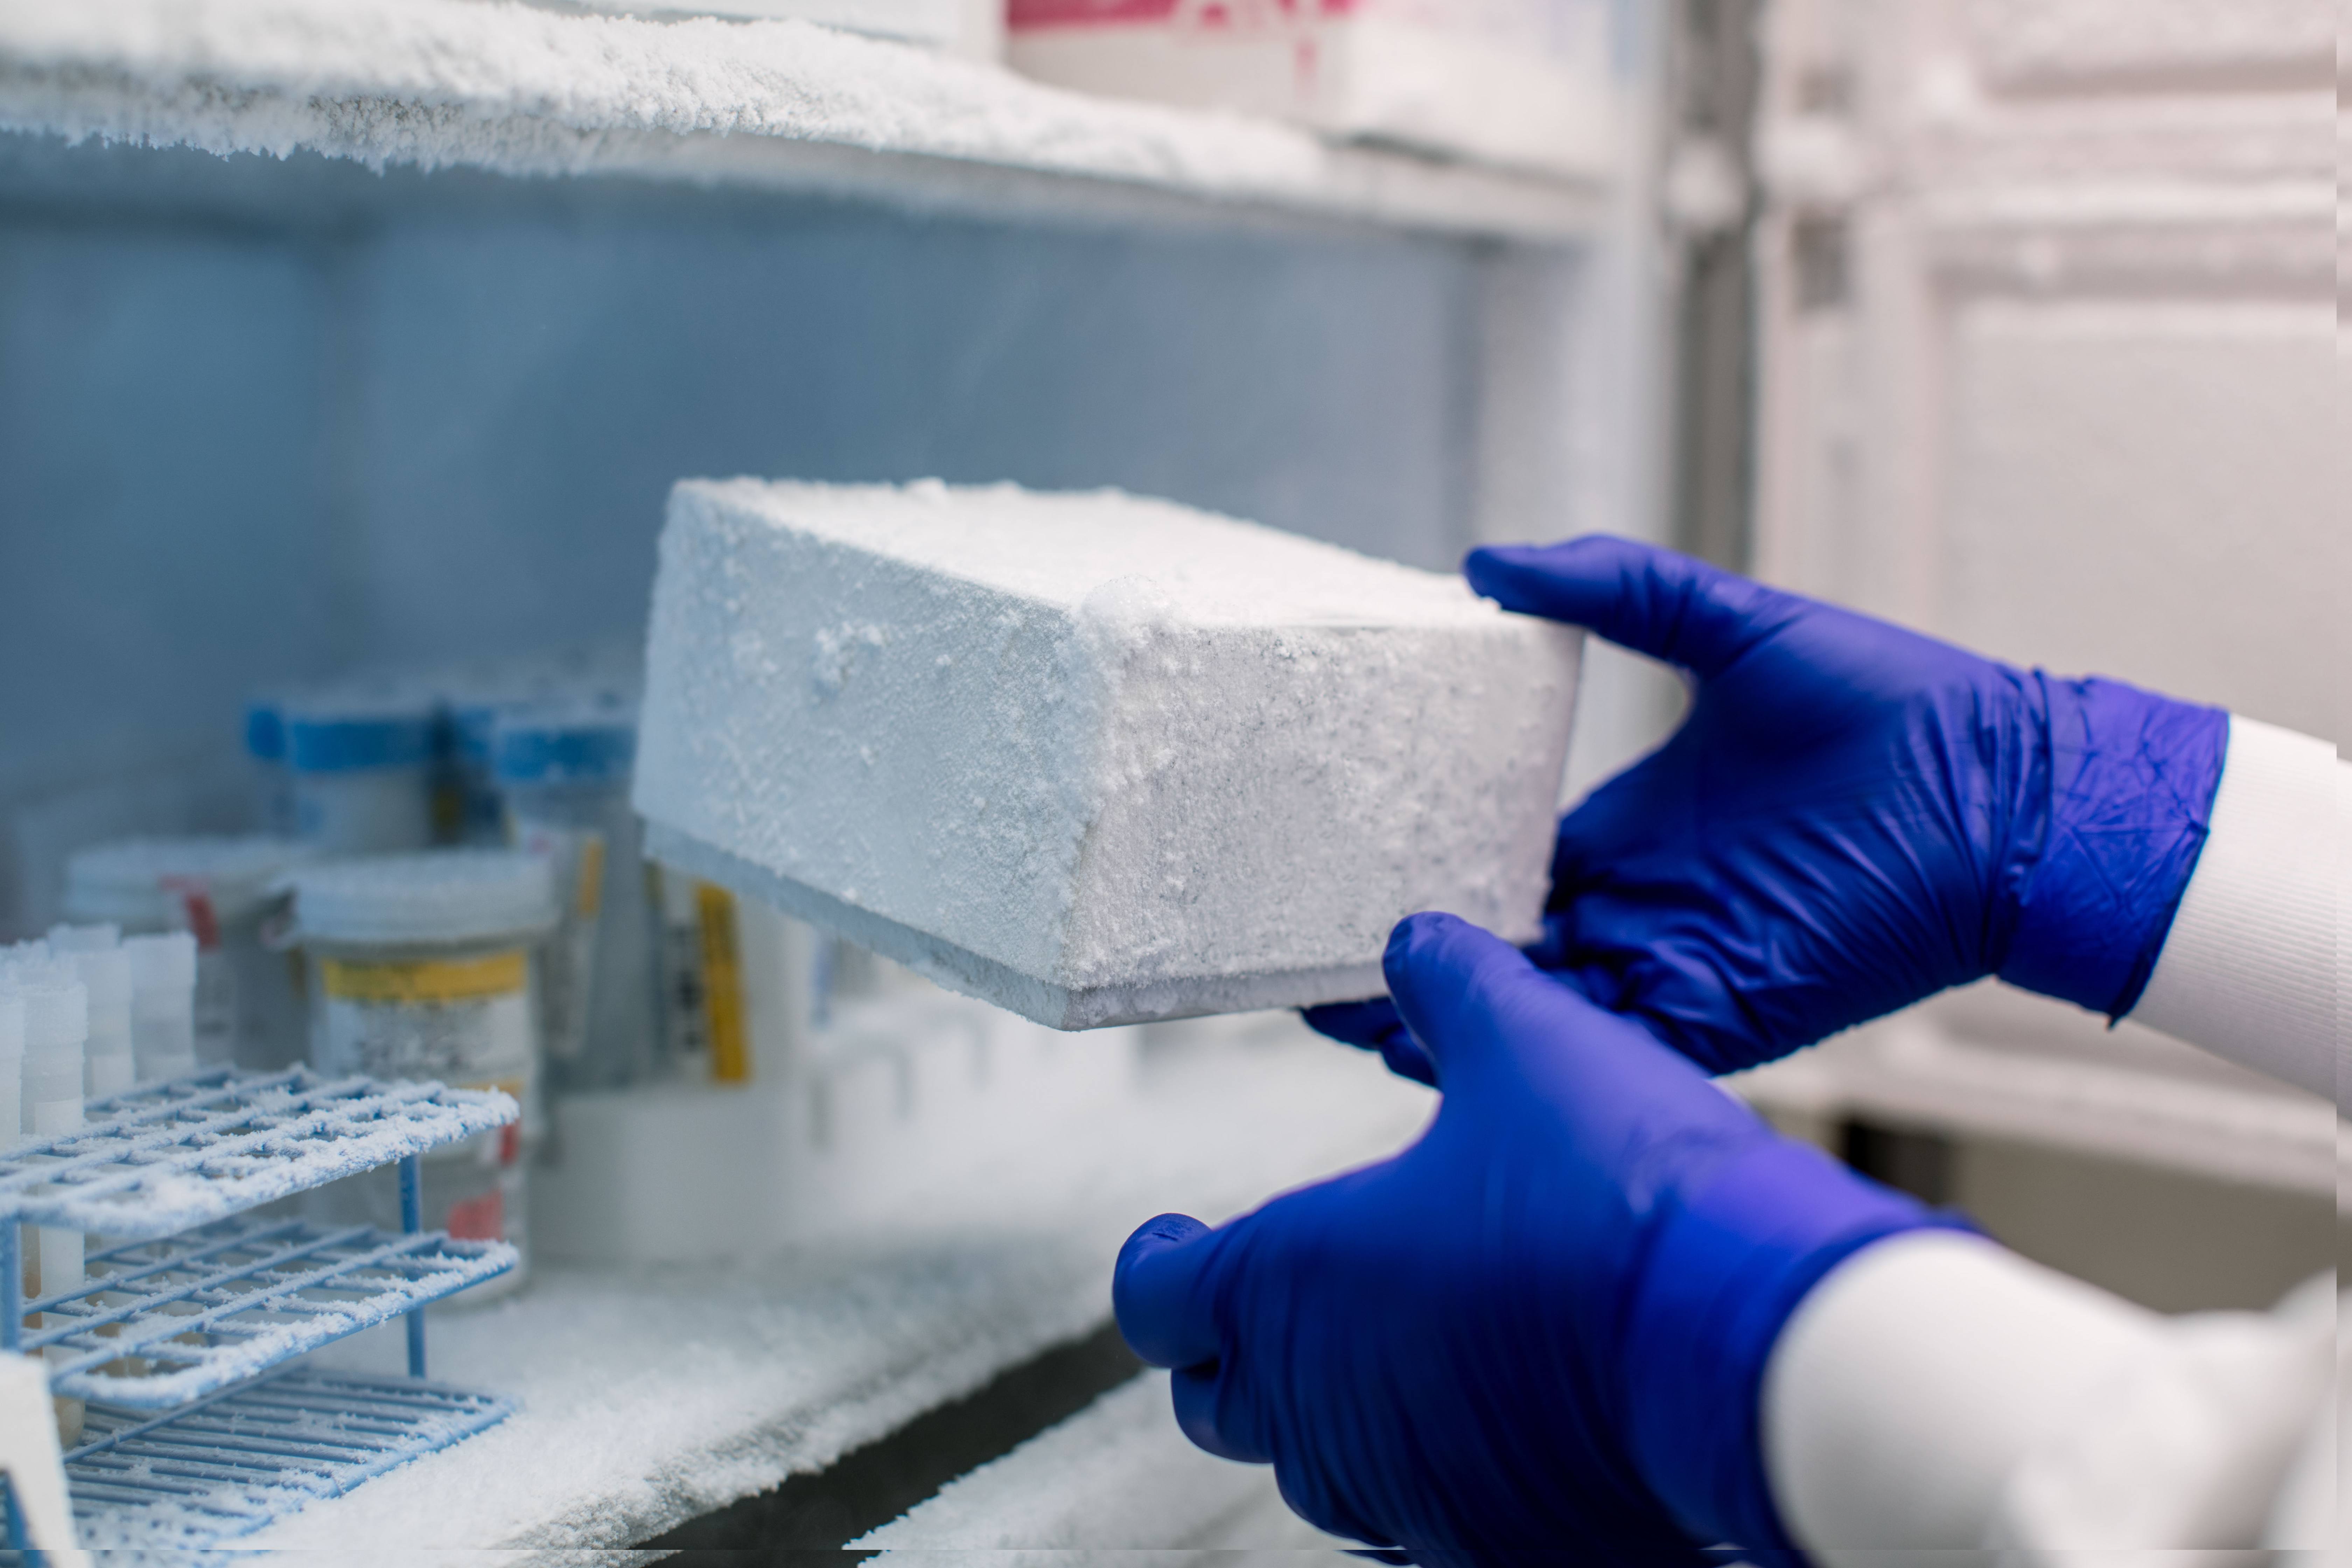 Research technologist removing frozen lab specimens from freezer